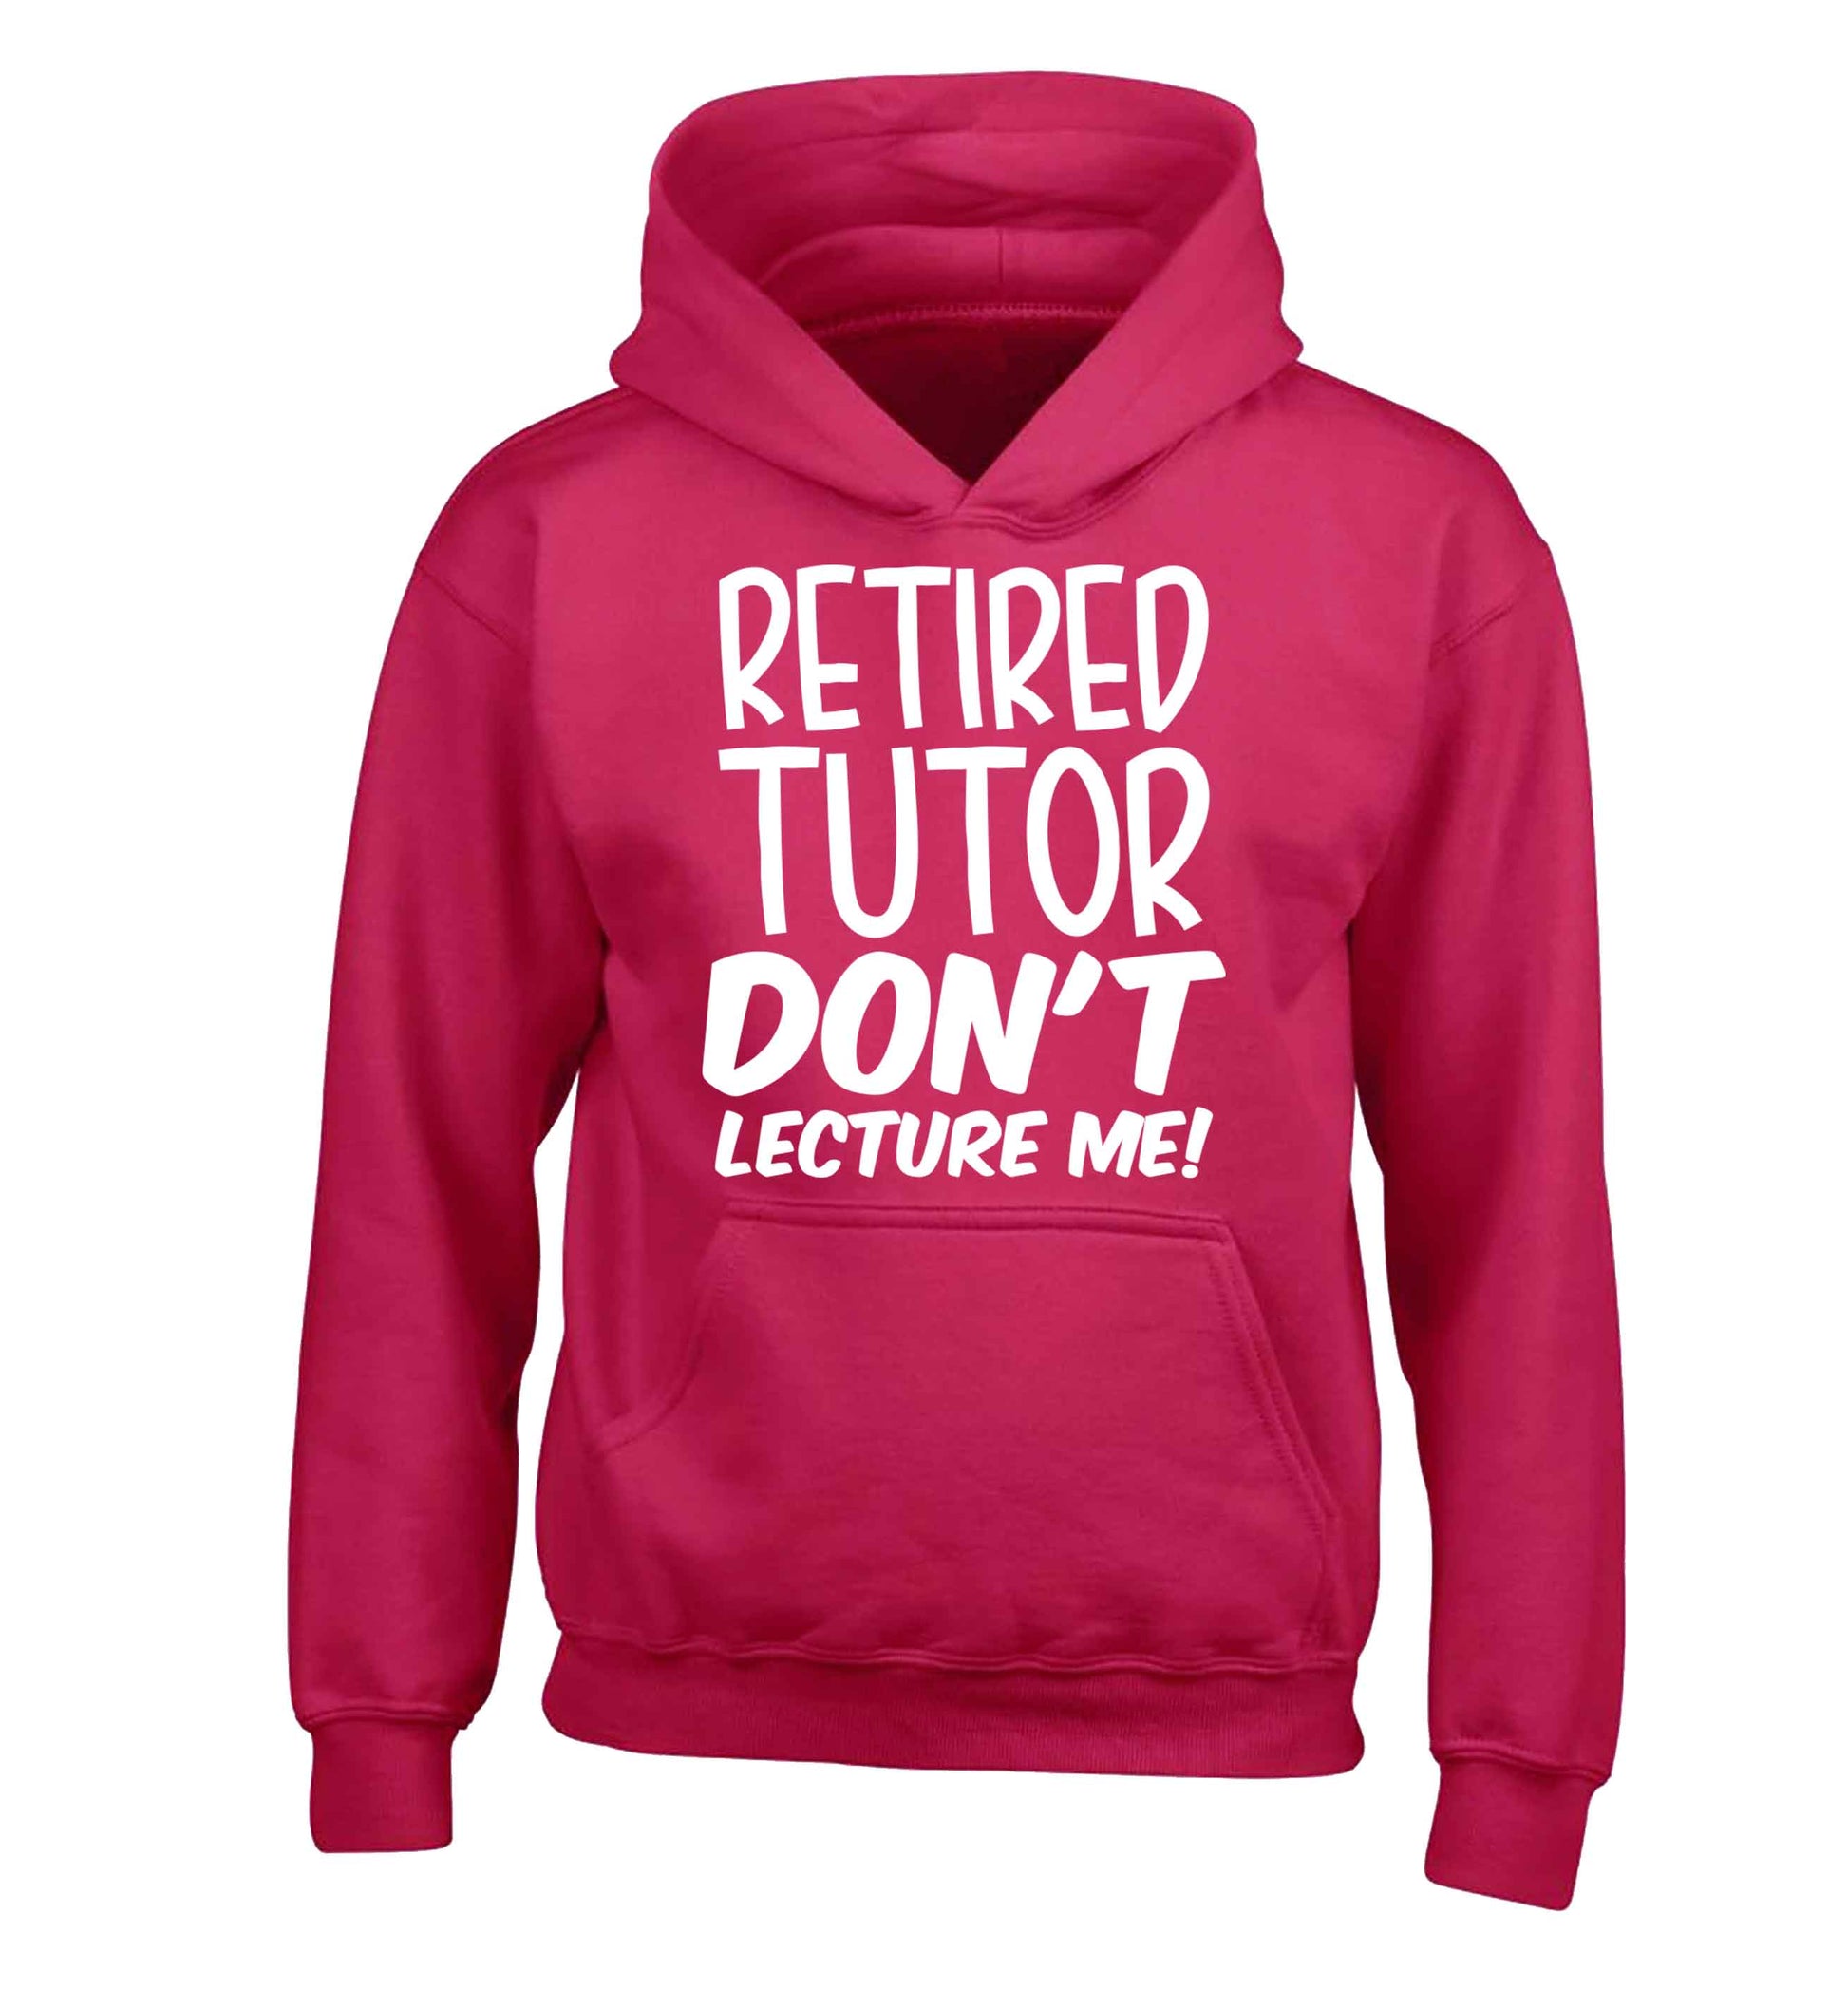 Retired tutor don't lecture me! children's pink hoodie 12-13 Years